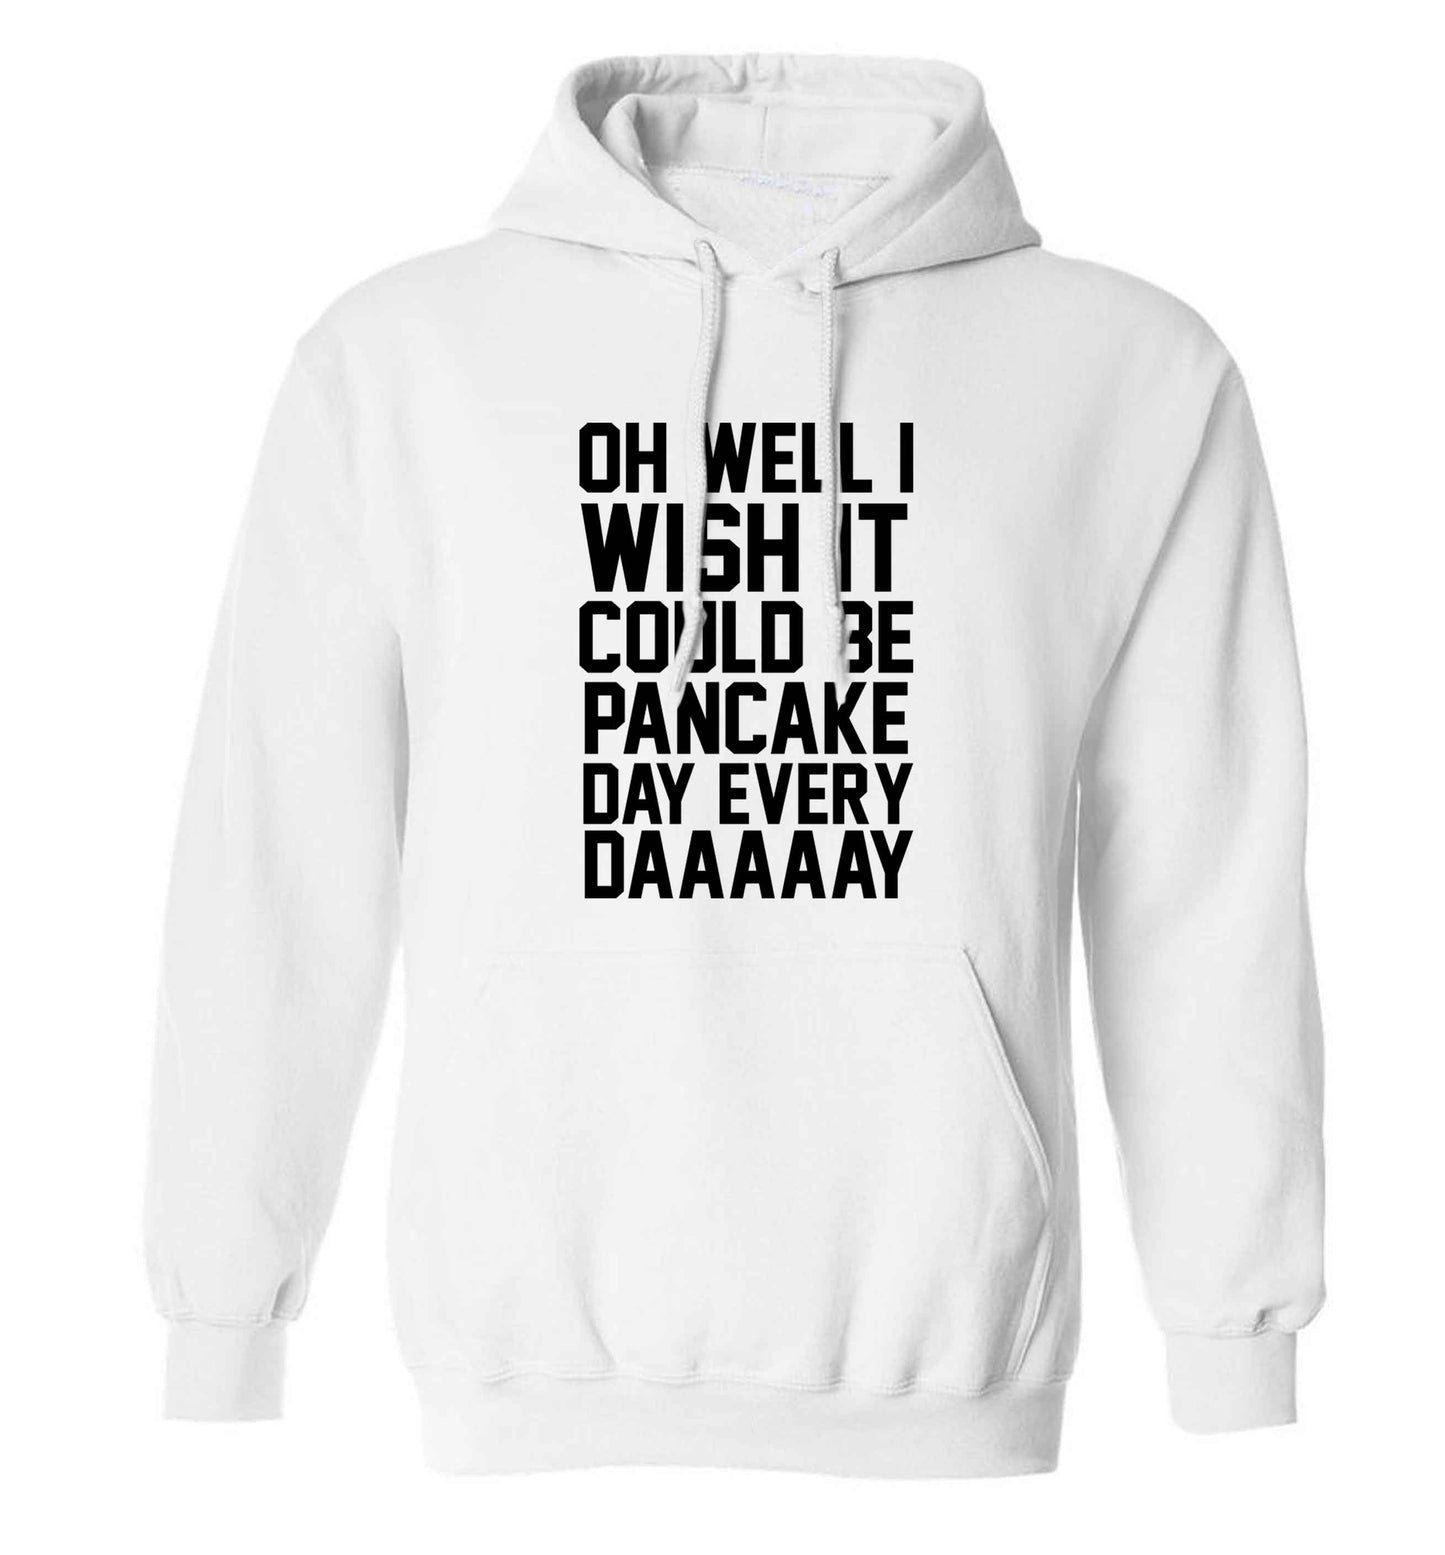 Oh well I wish it could be pancake day every day adults unisex white hoodie 2XL